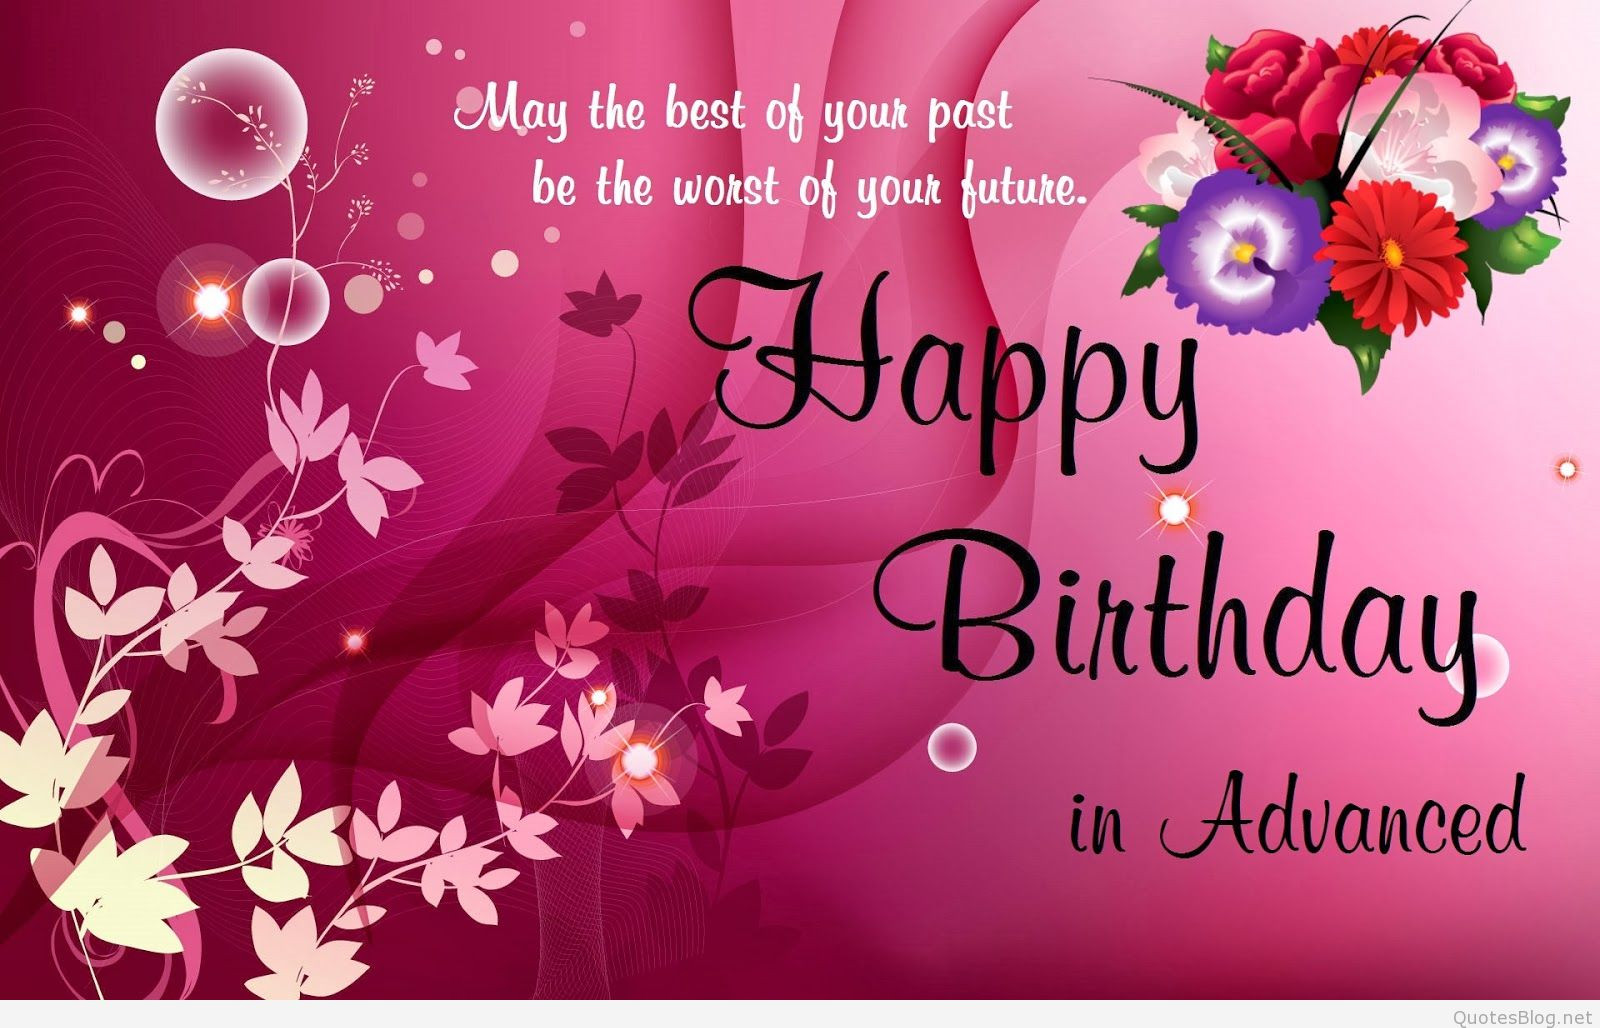 Best Birthday Wishes Quotes
 Top 20 happy birthday quotes and messages